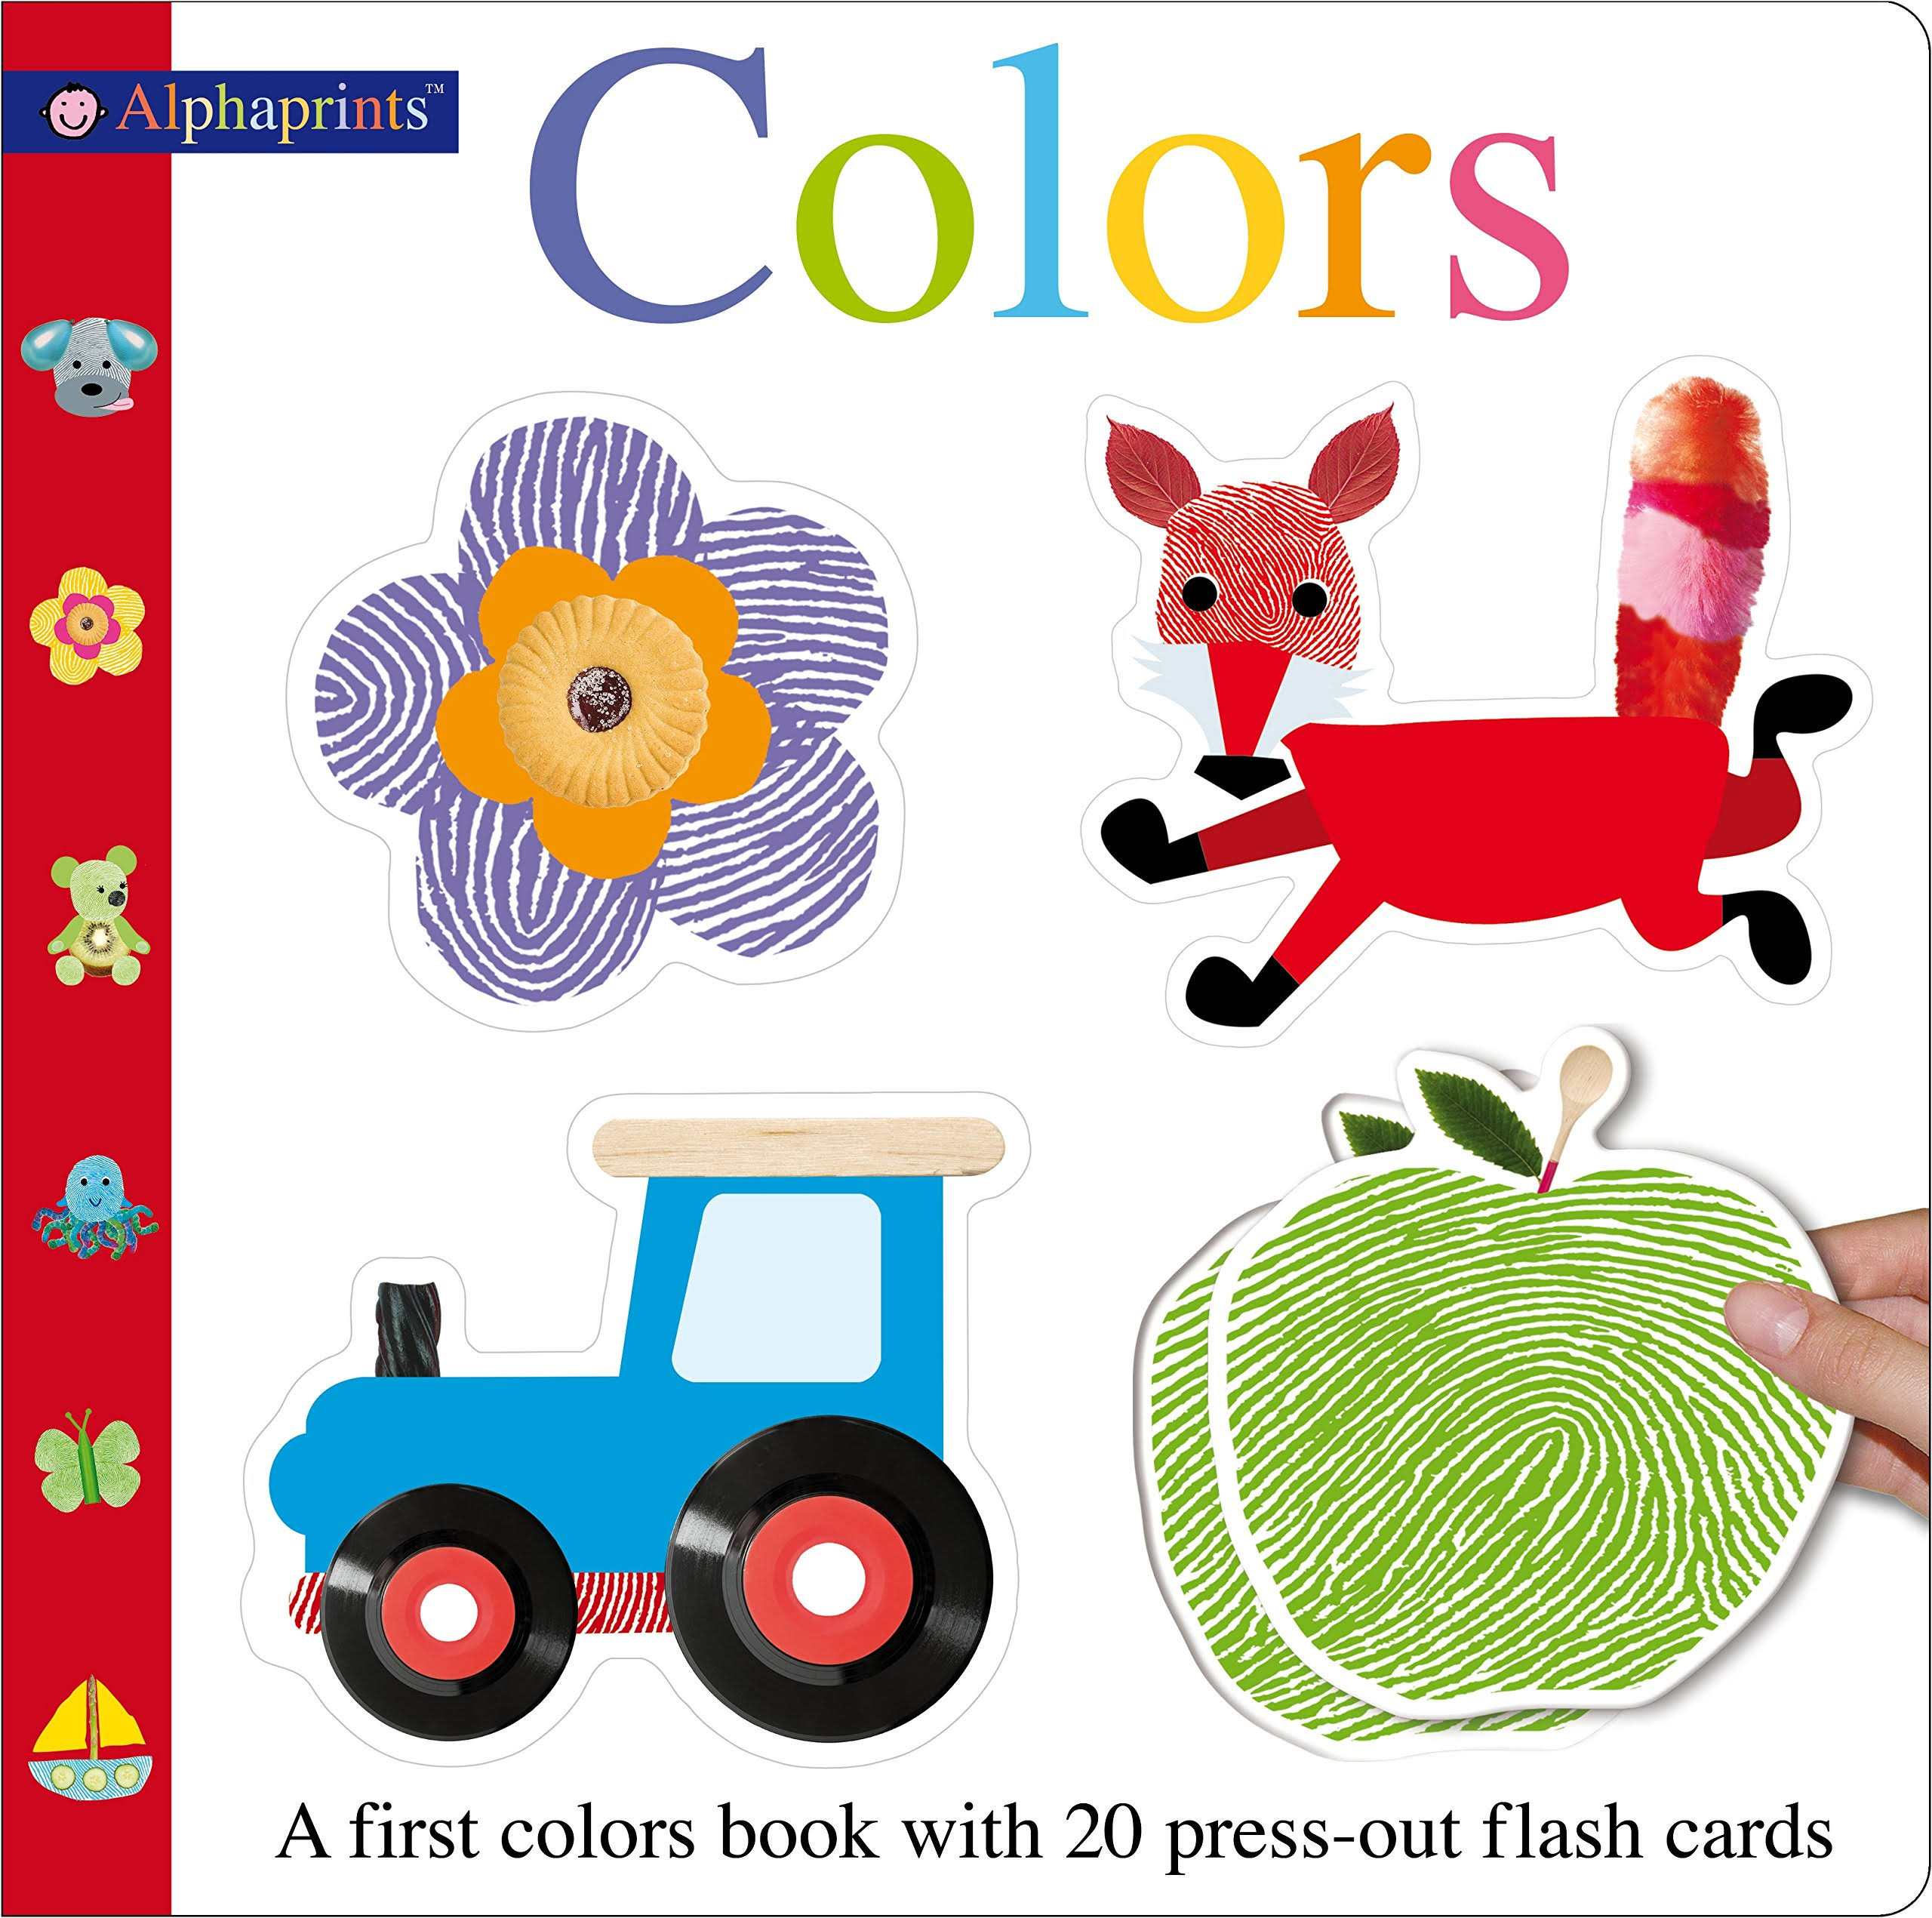 Alphaprints Colors Flash Card Book: A First Colors Book with 20 Press-out Flash Cards [Book]